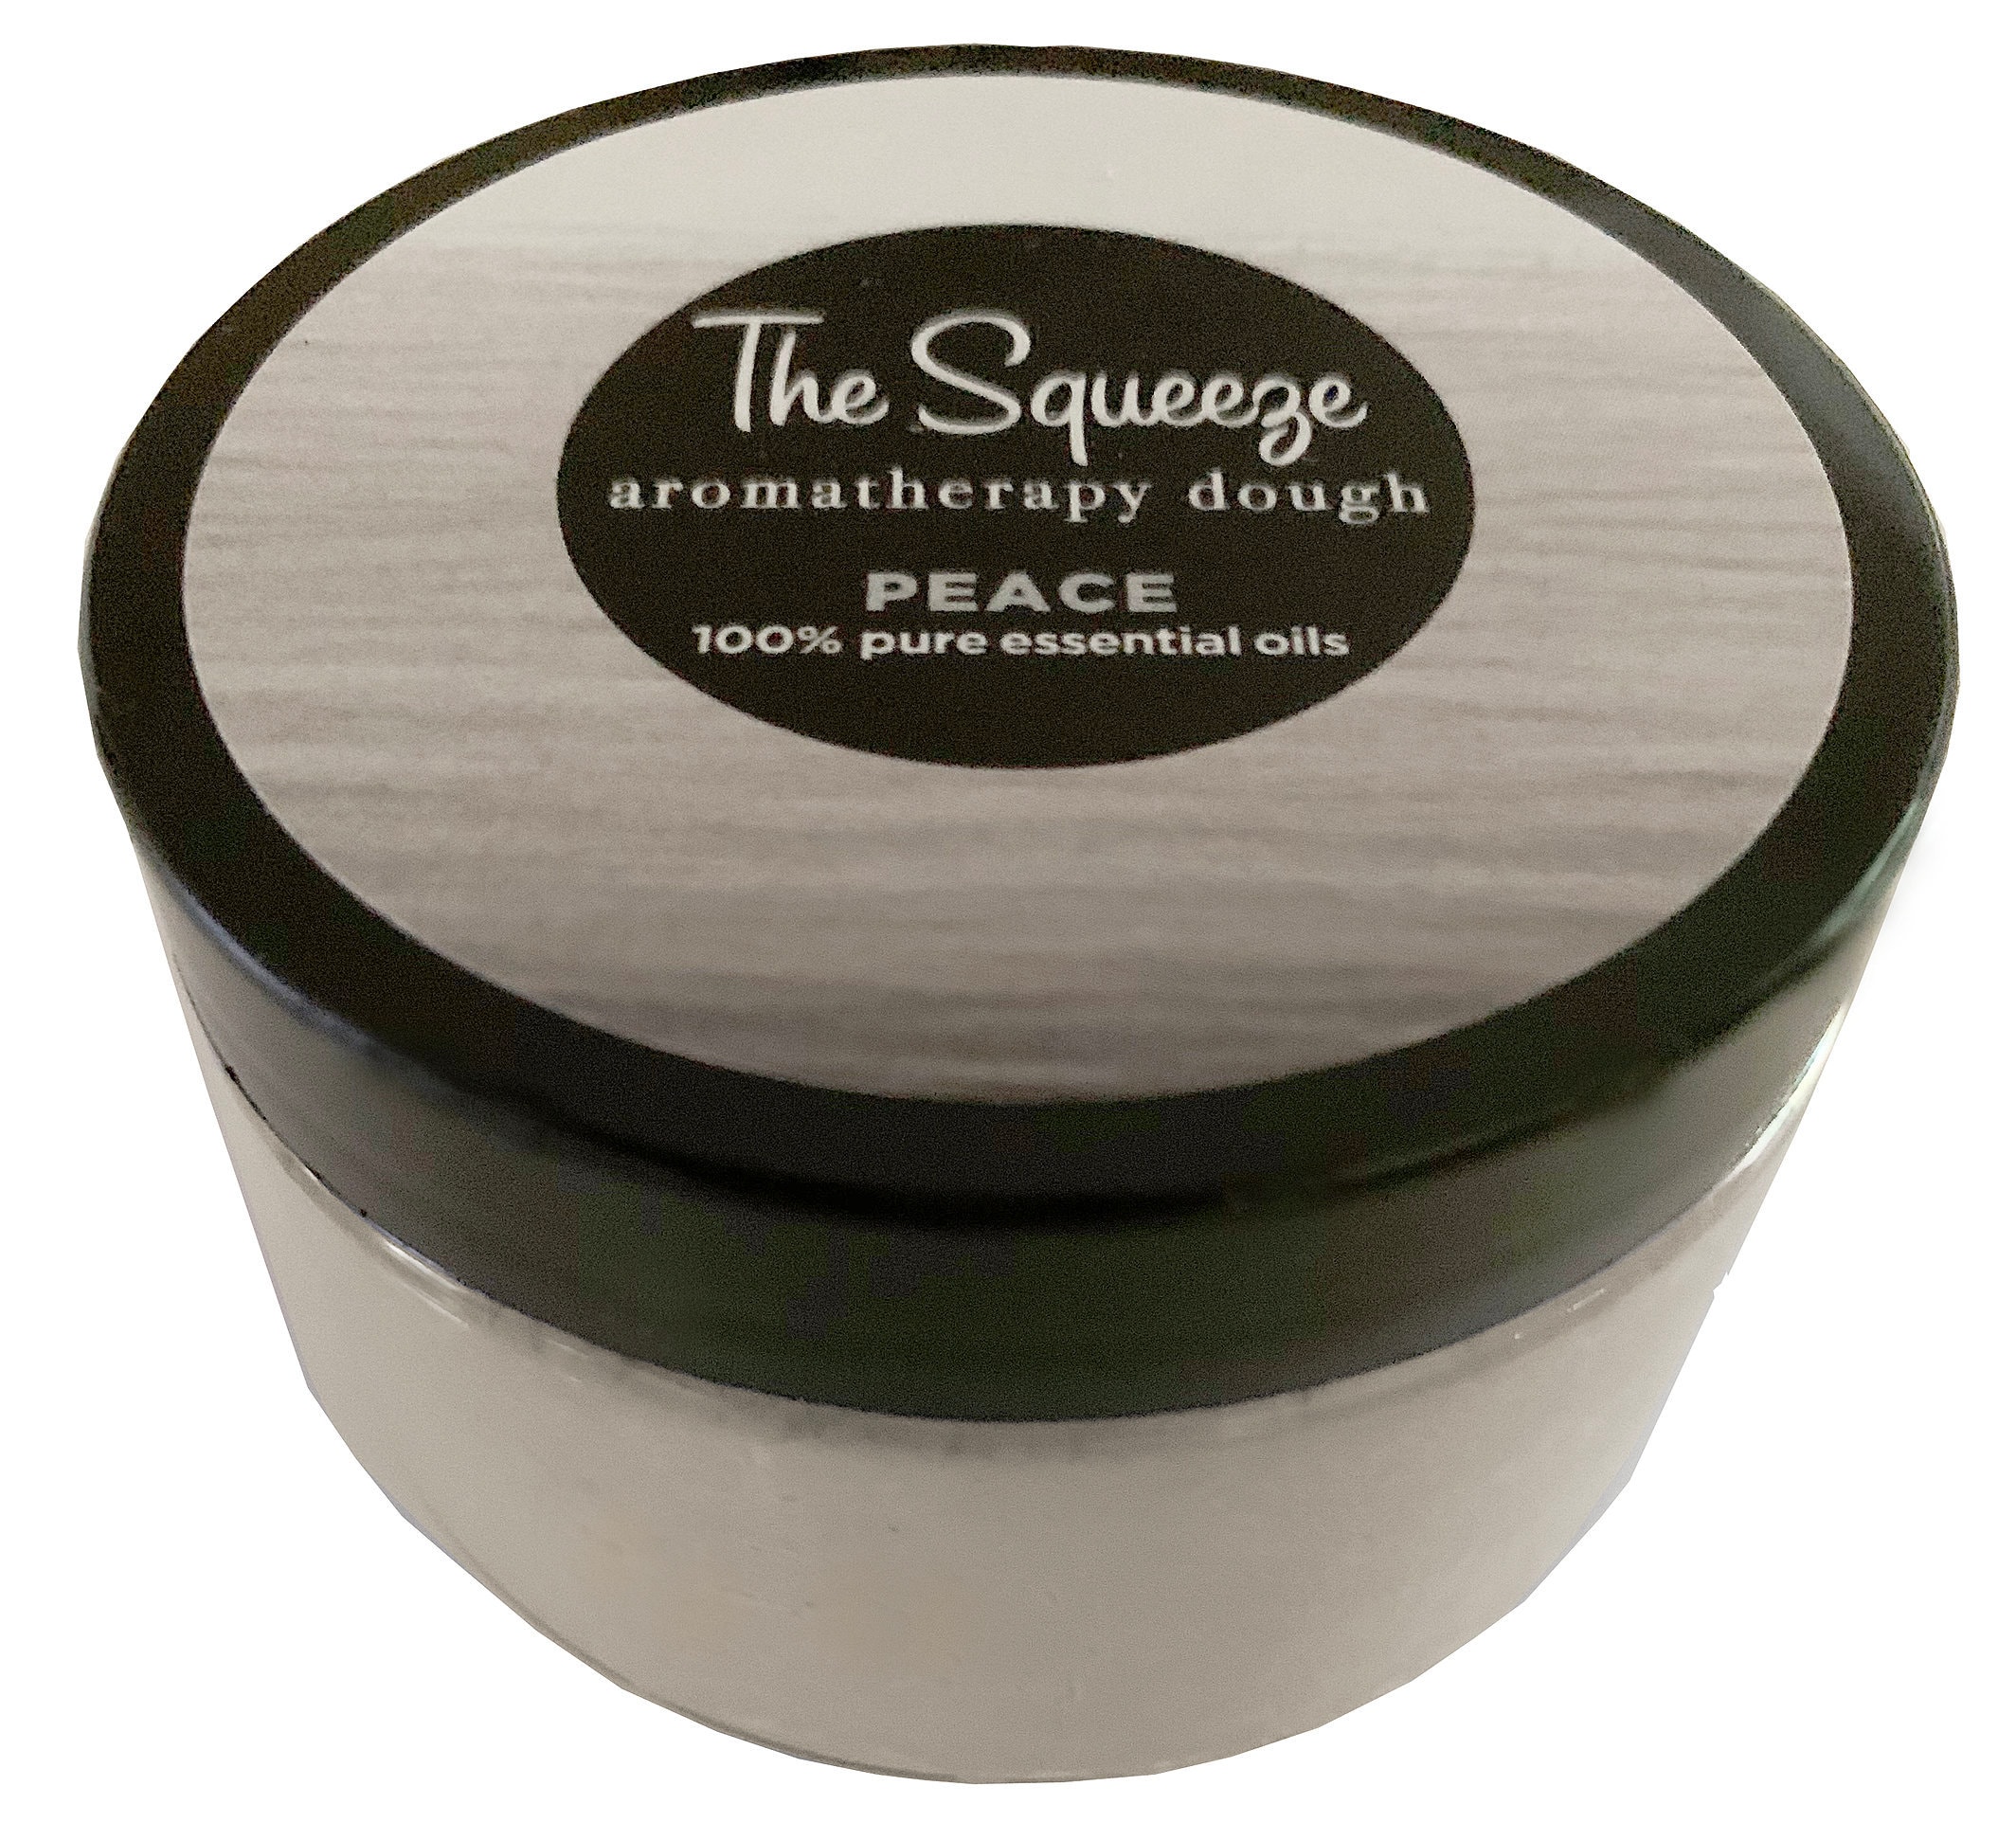 The Squeeze - Peace Blend Mint, Herbal & Citrus 100% Essential Oil Stress Relief Therapy Dough, Ball, Aromatherapy Putty